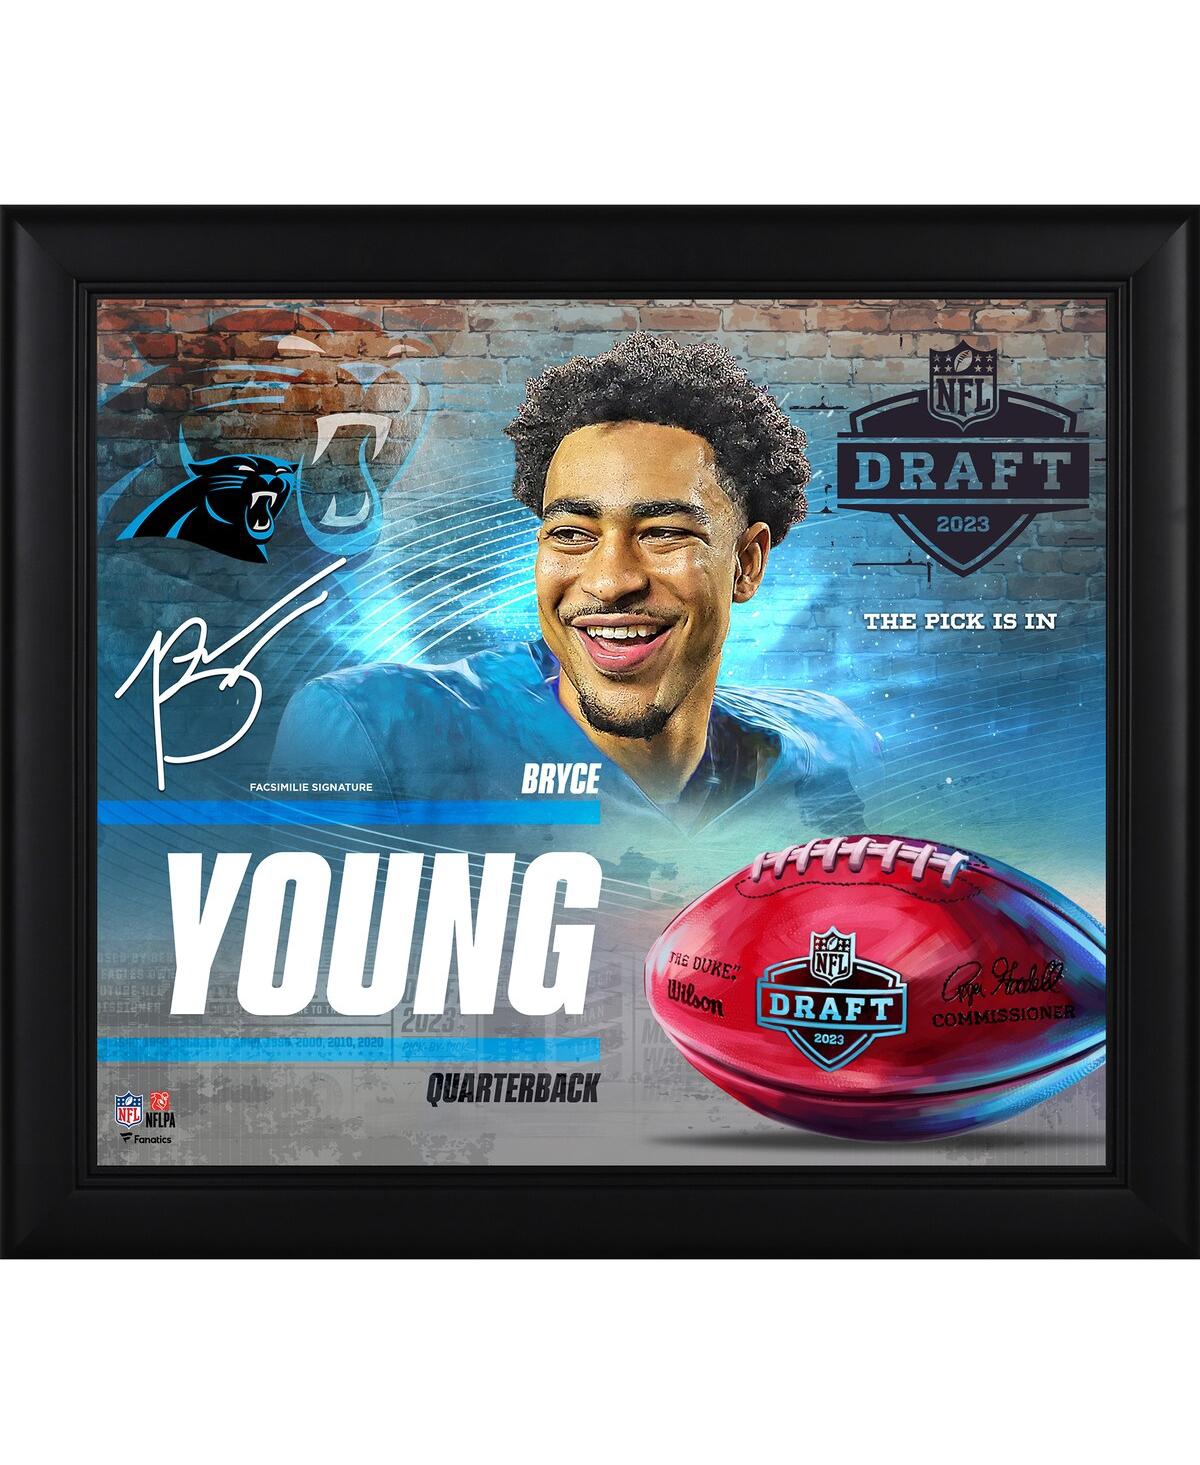 Fanatics Authentic Bryce Young Carolina Panthers Facsimile Signature Framed 15" X 17" X 1" 2023 Nfl Draft Day Collage In Multi